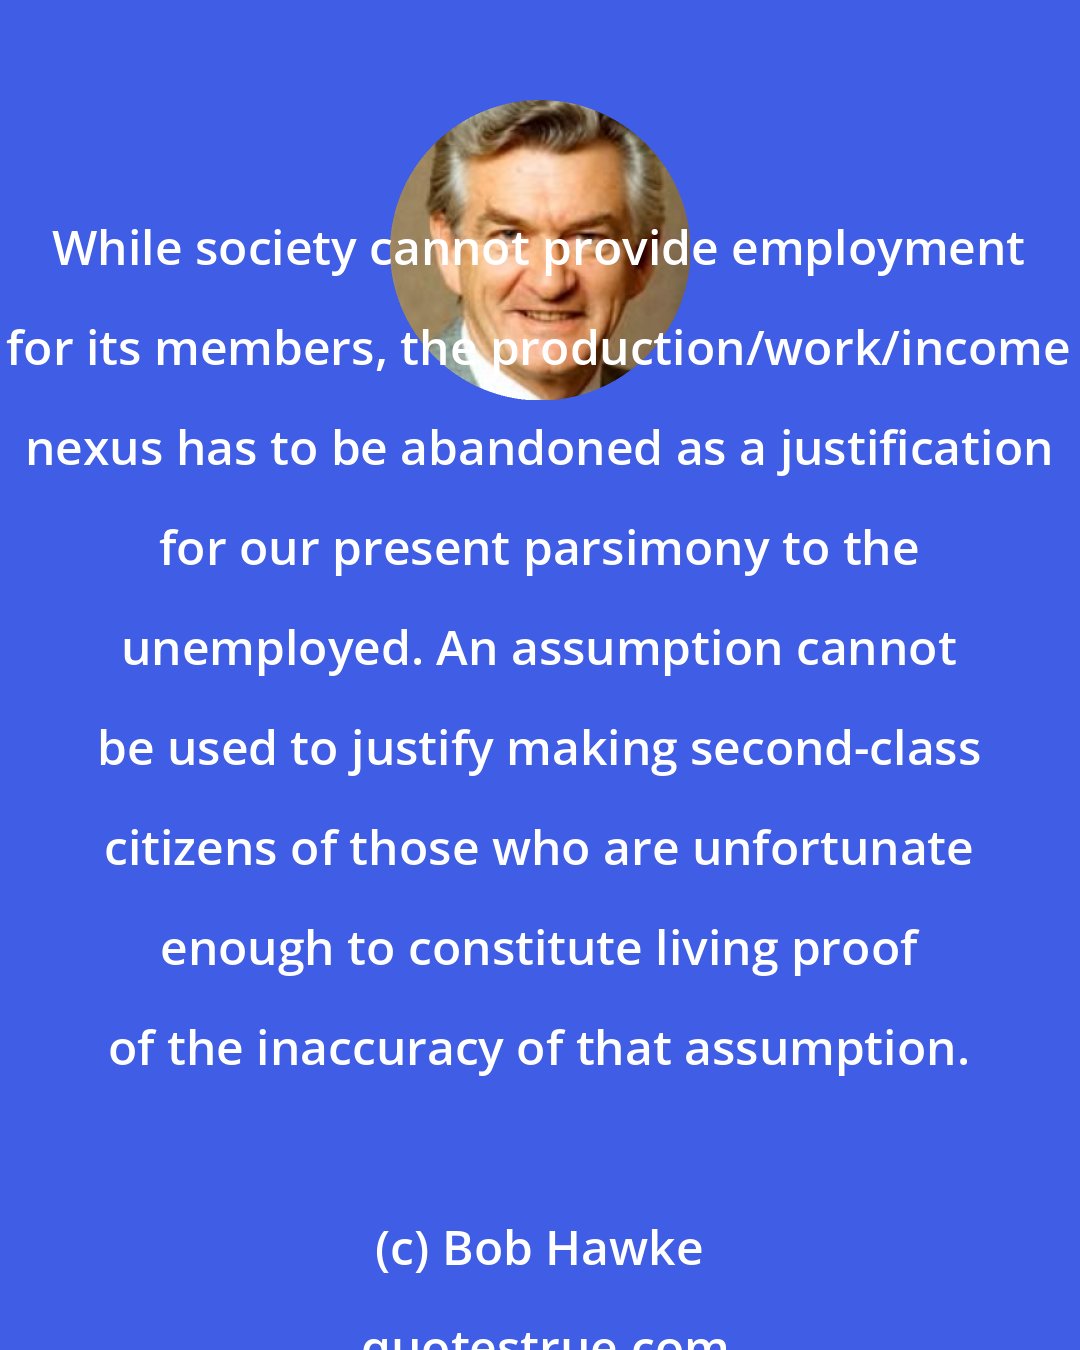 Bob Hawke: While society cannot provide employment for its members, the production/work/income nexus has to be abandoned as a justification for our present parsimony to the unemployed. An assumption cannot be used to justify making second-class citizens of those who are unfortunate enough to constitute living proof of the inaccuracy of that assumption.